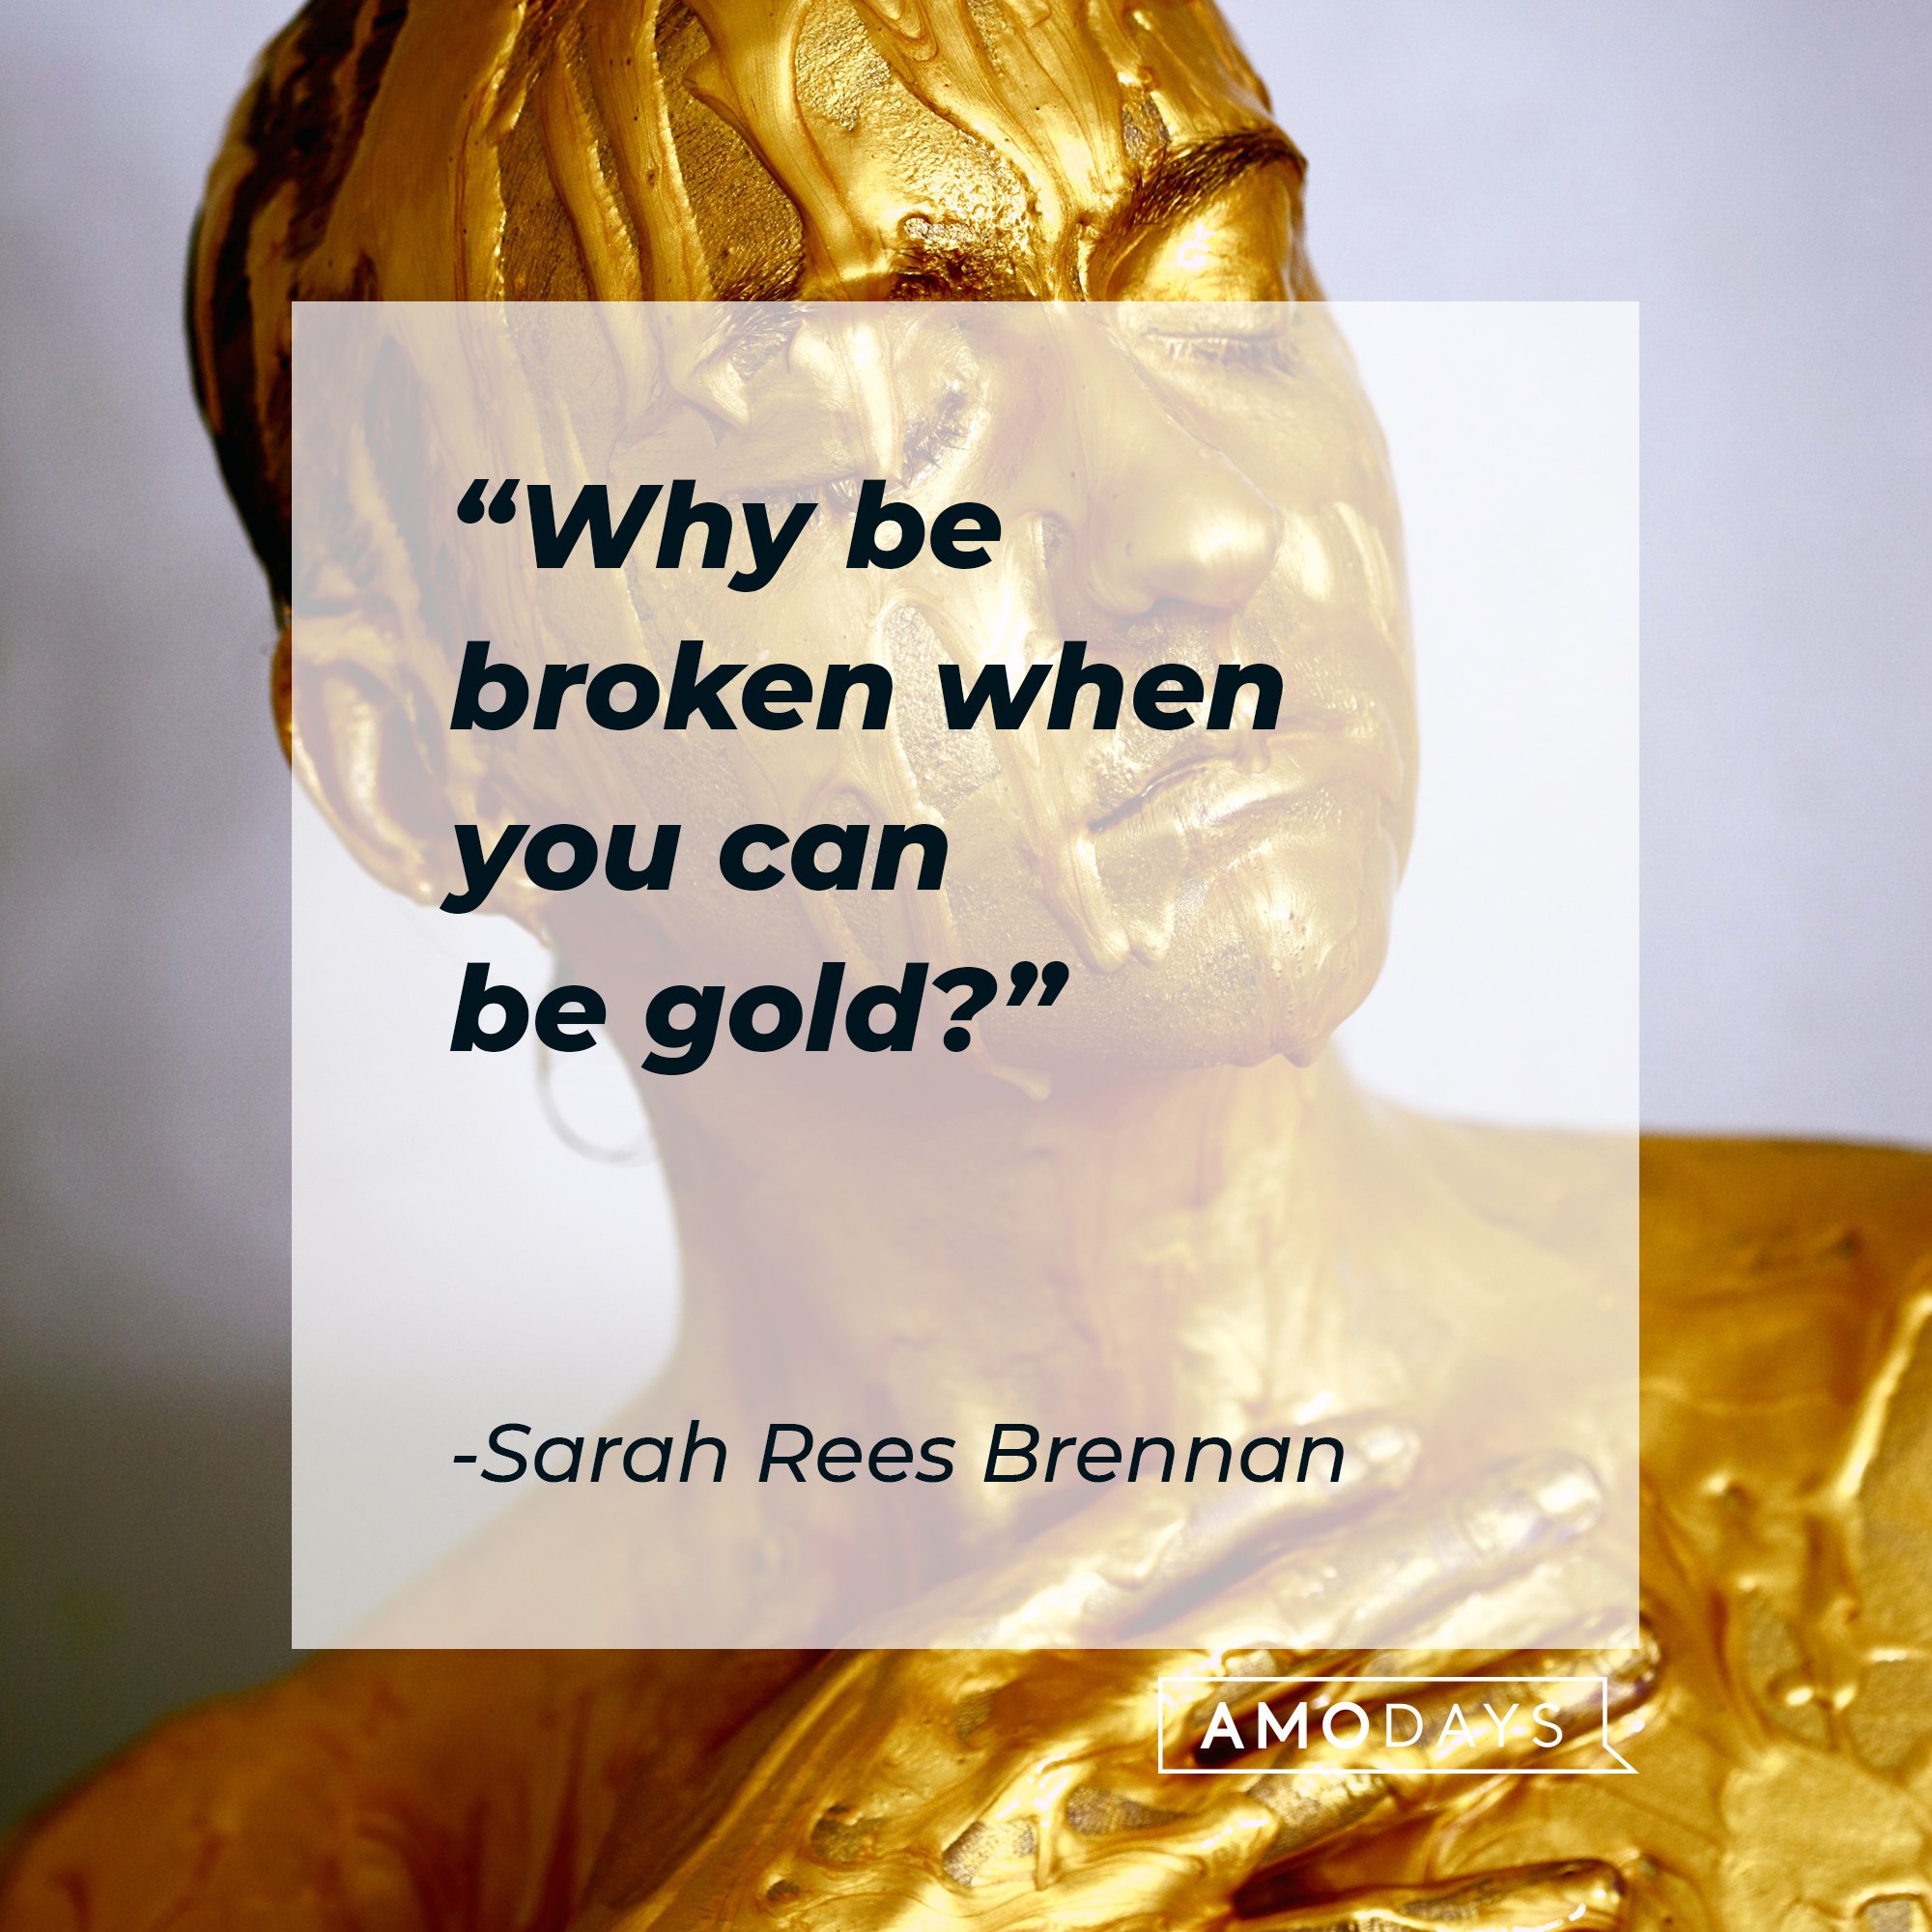 Sarah Rees Brennan’s quote: "Why be broken when you can be gold?" | Image: AmoDays